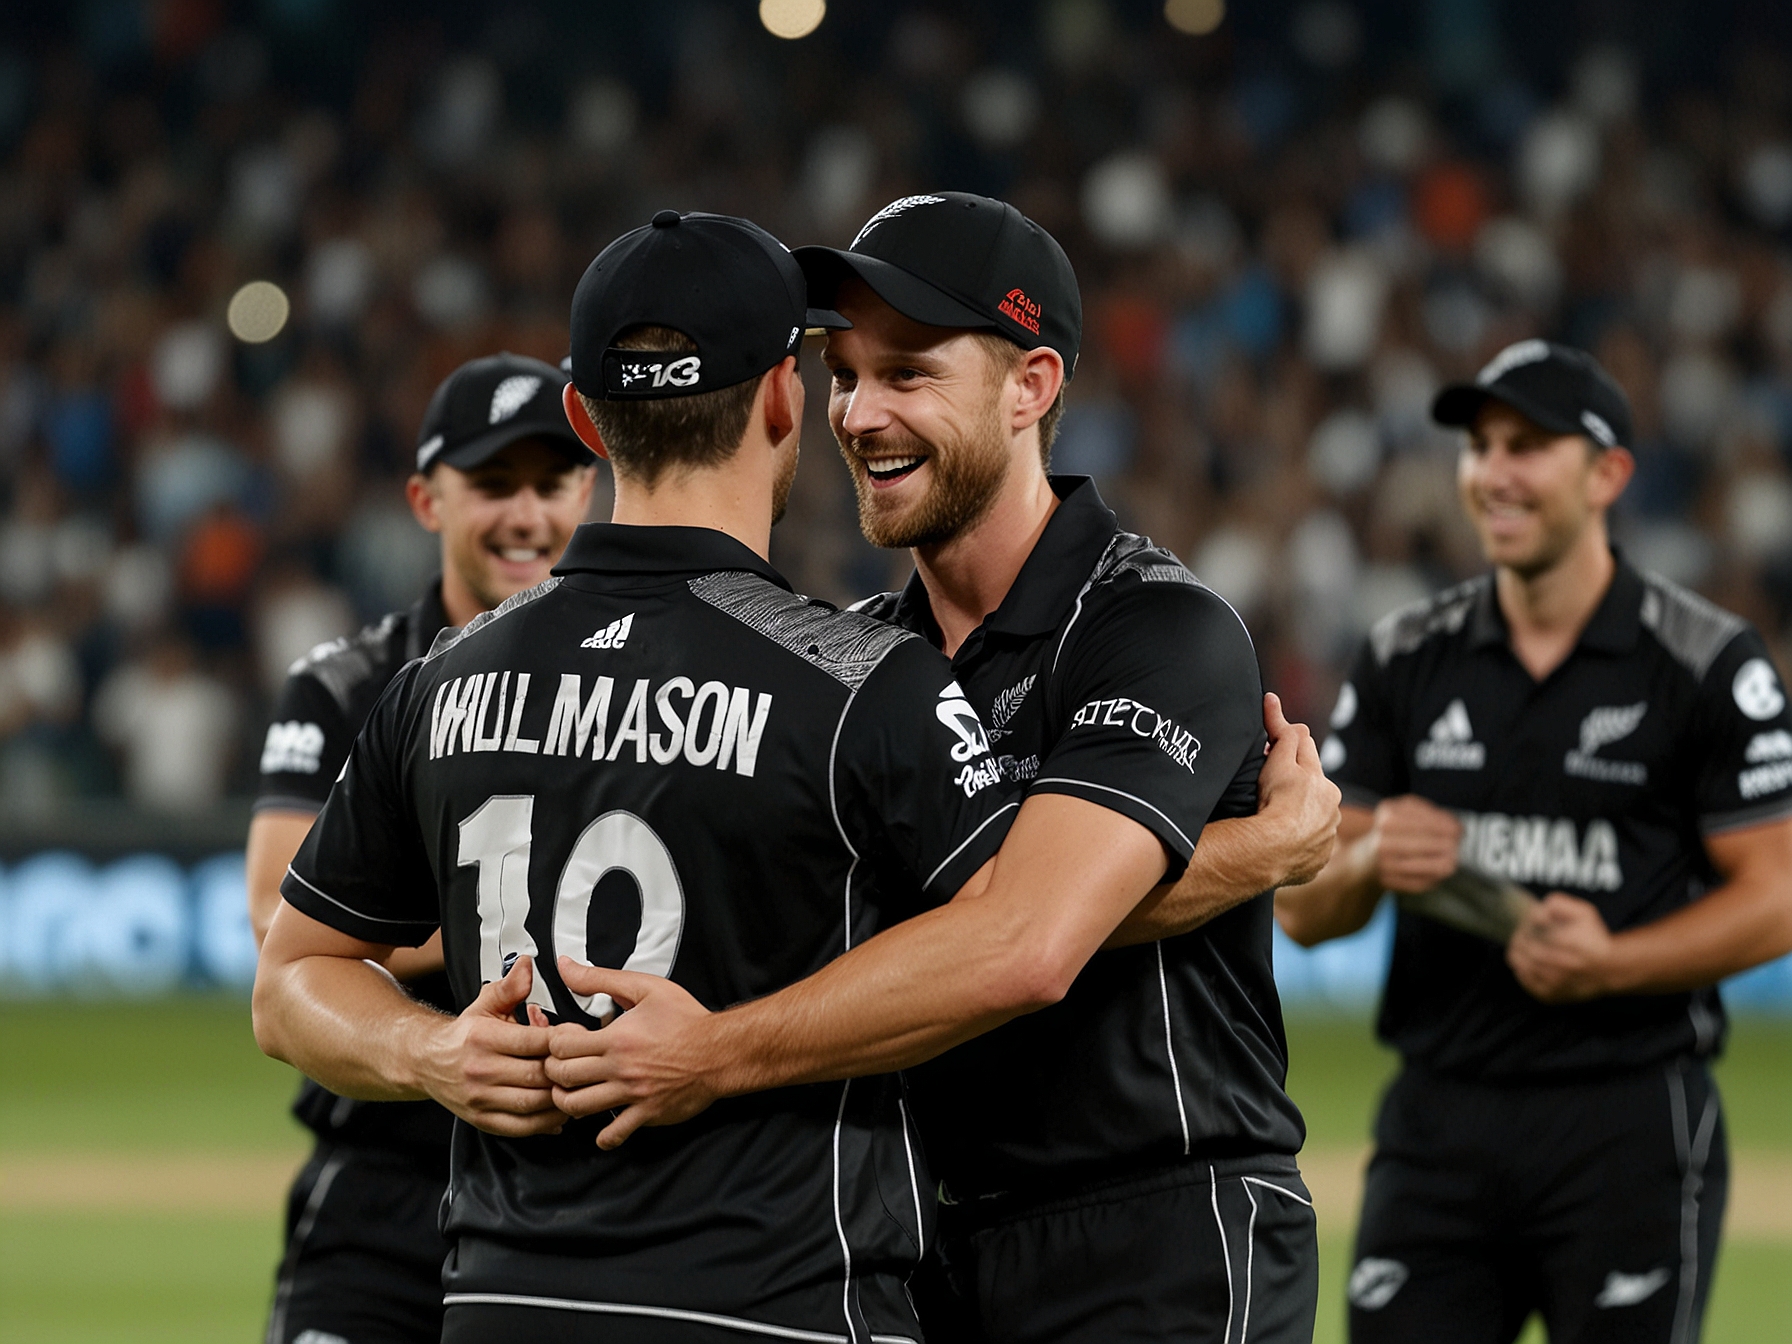 Kane Williamson embraces Trent Boult on the field after Boult's final T20 World Cup match, both players surrounded by their teammates in a moment of respect and admiration.